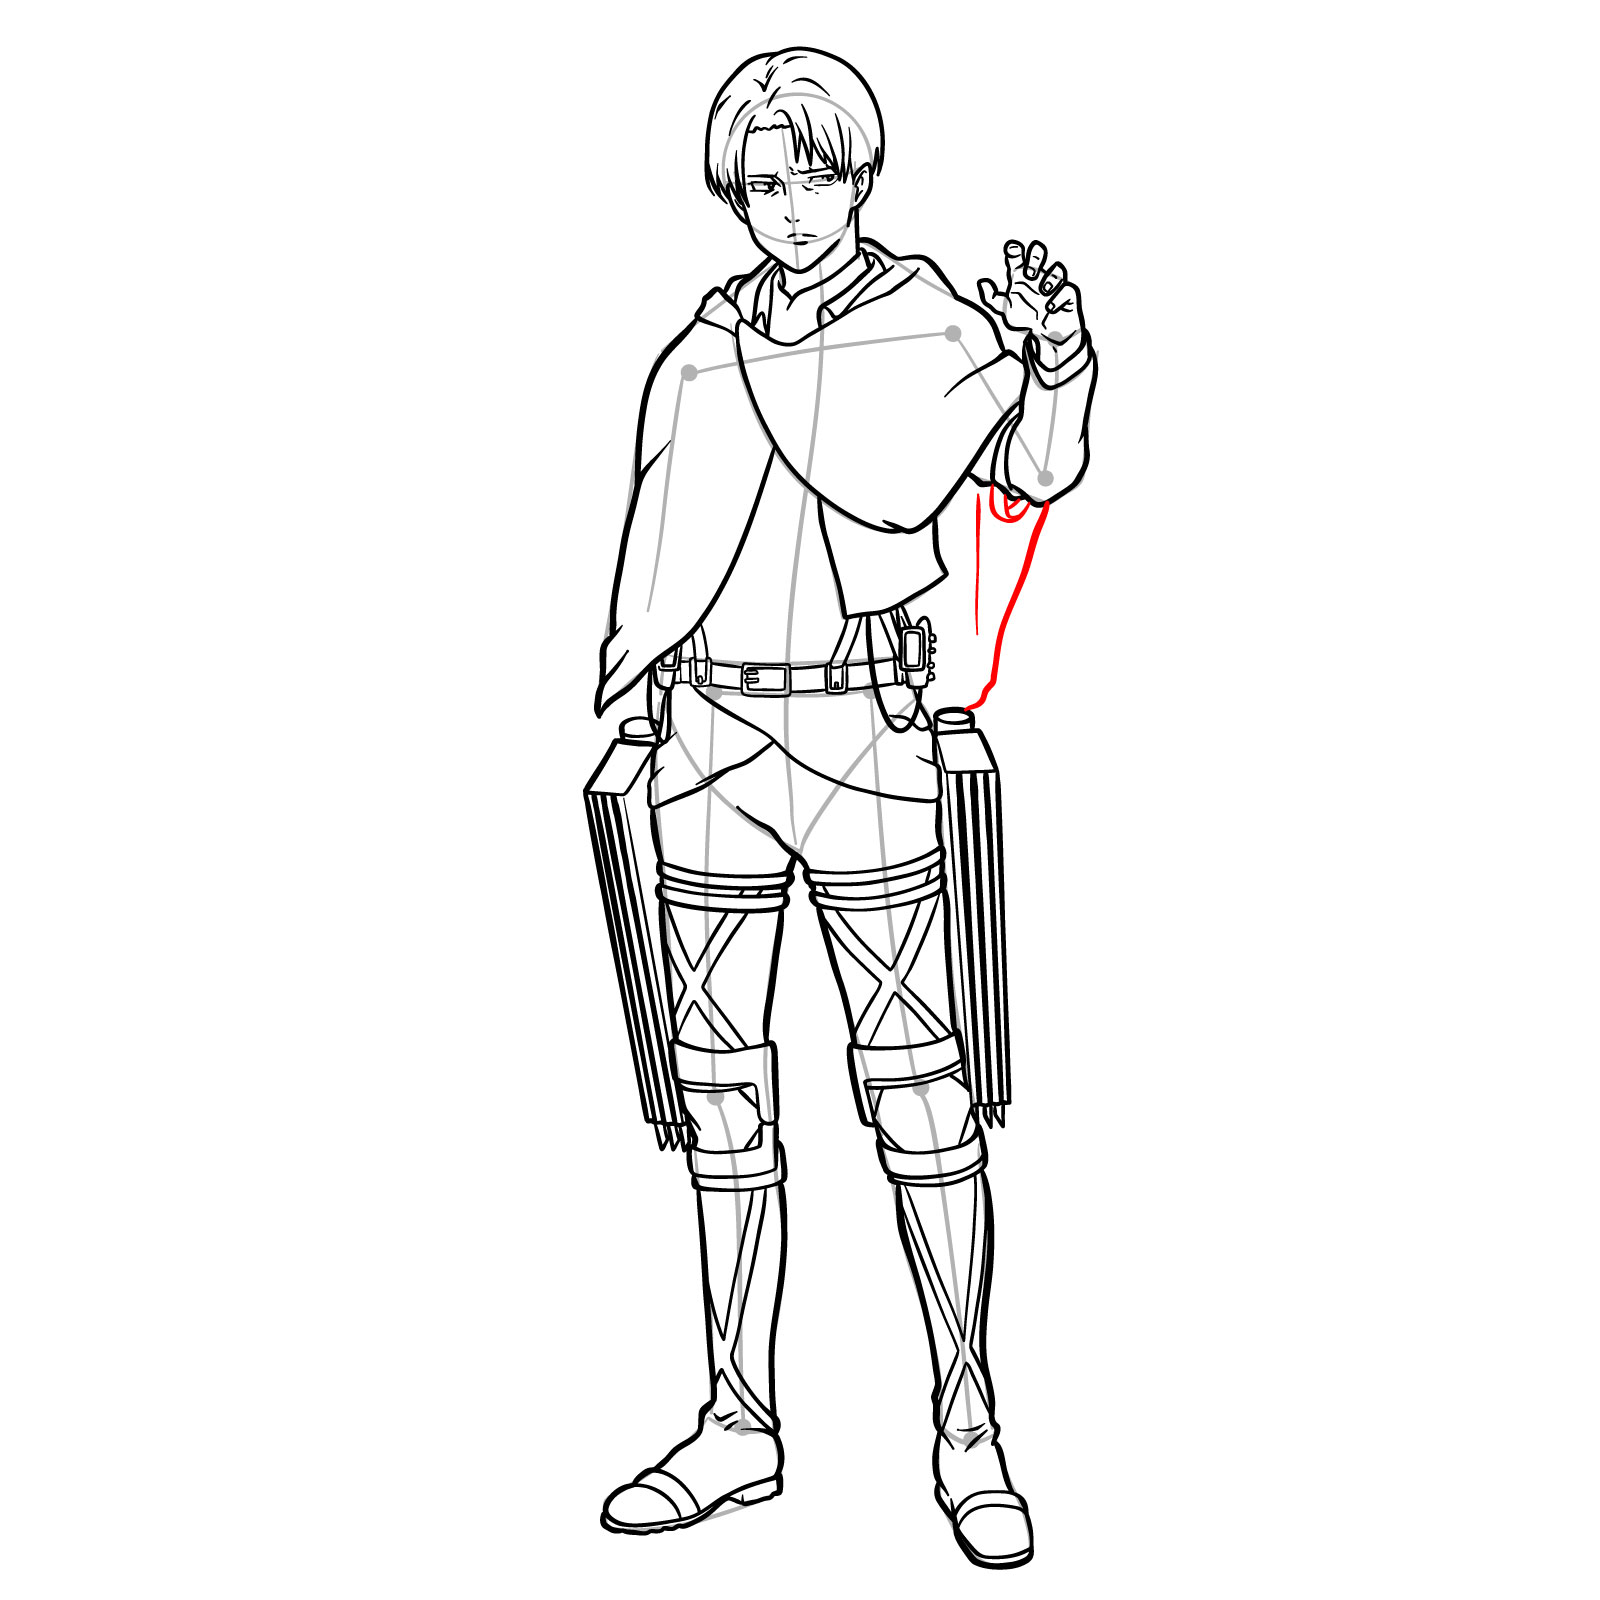 How to draw the missing part of Captain Levi's cloak in a full-body drawing guide - step 27